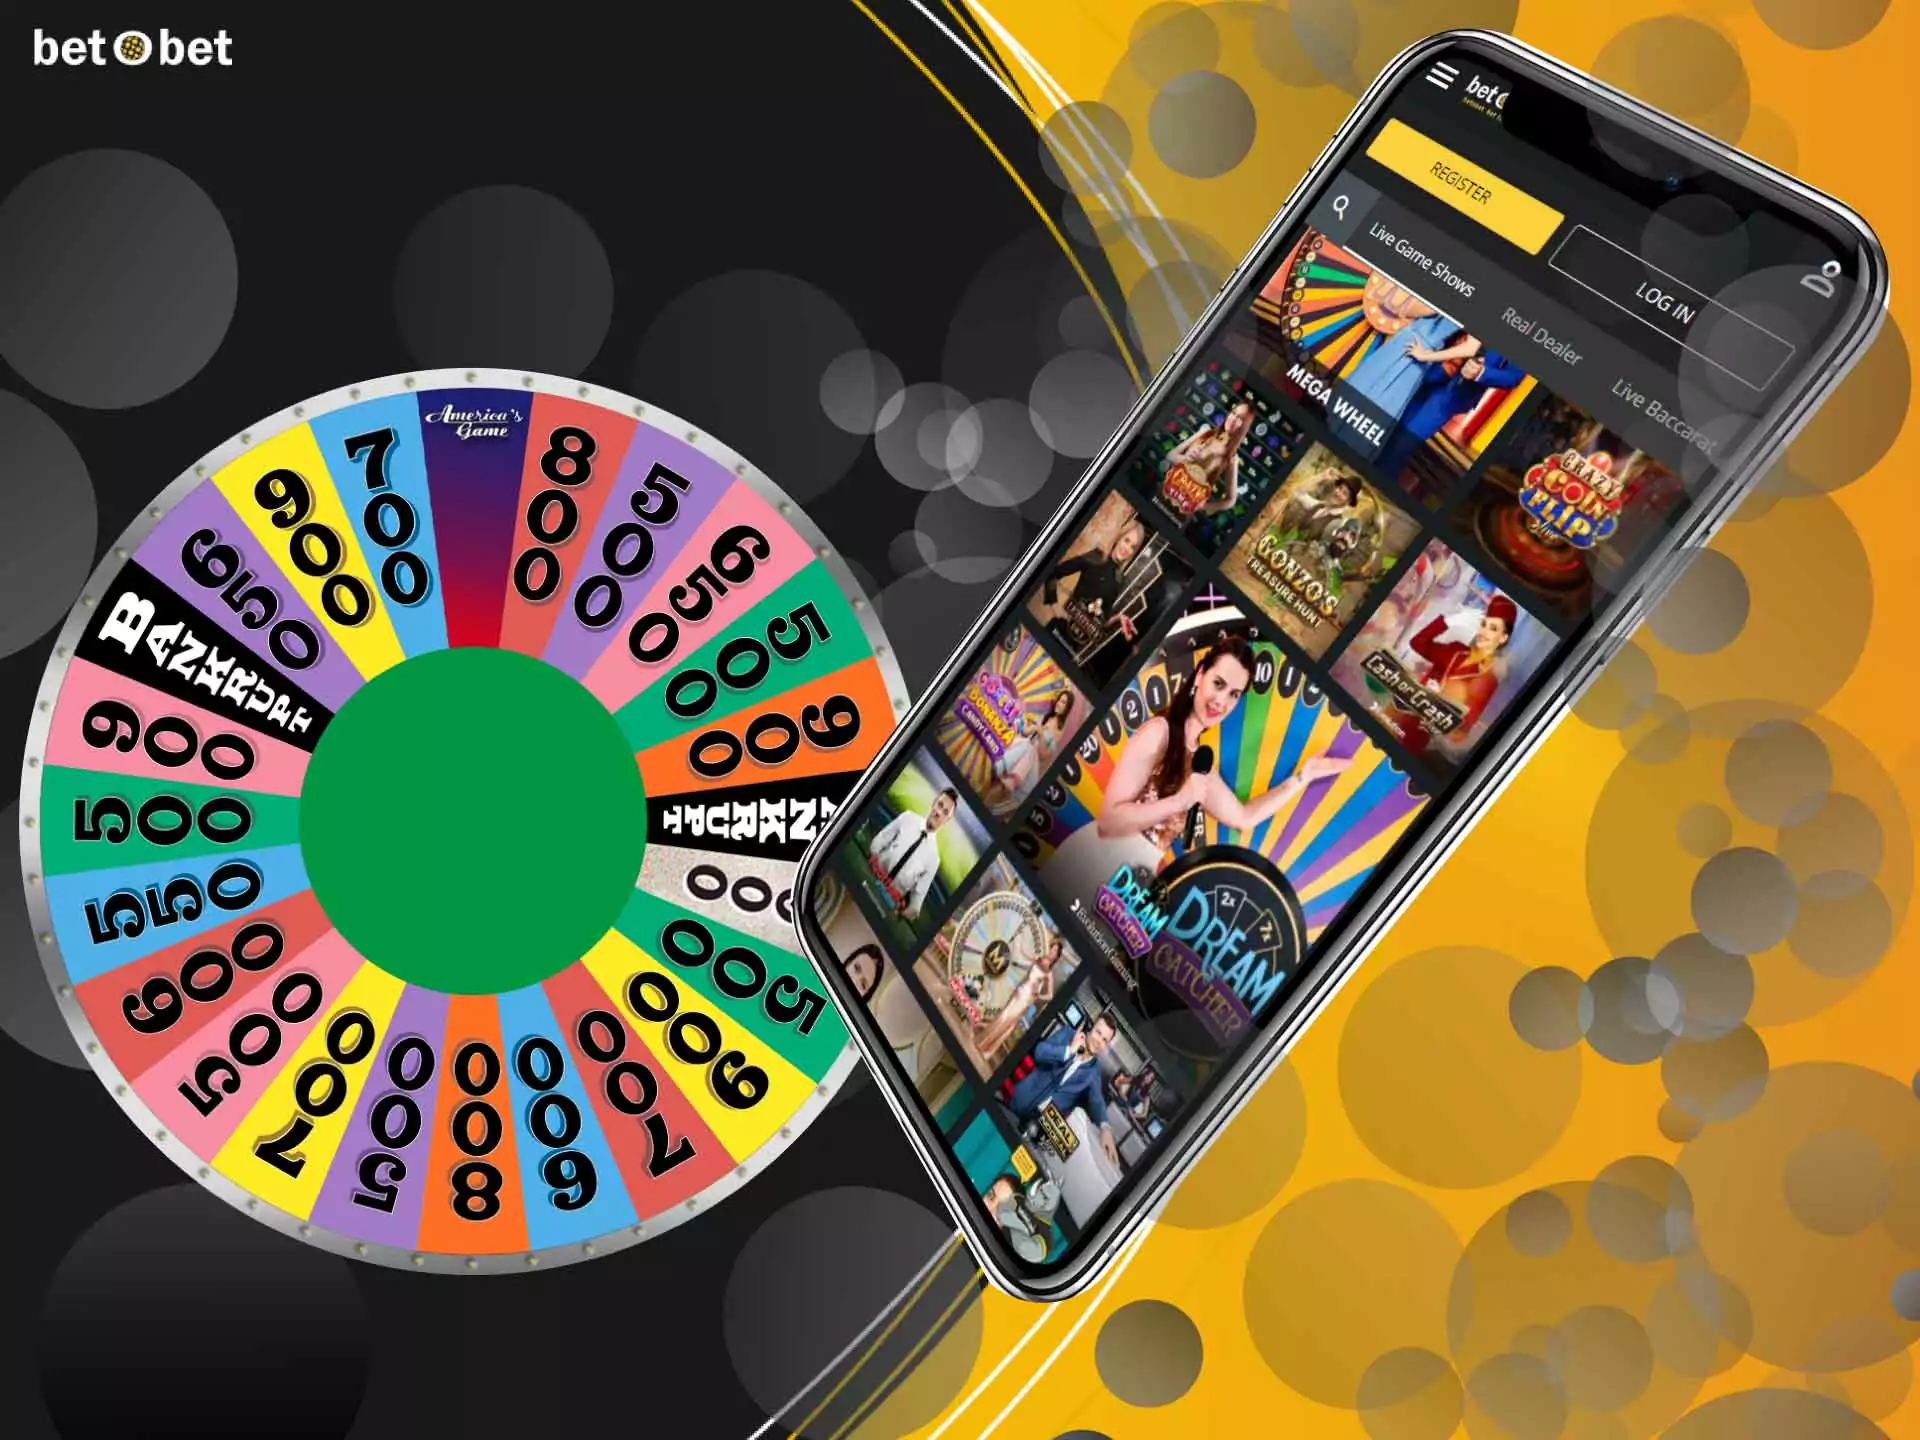 Try the unquie casino games at BetOBet.